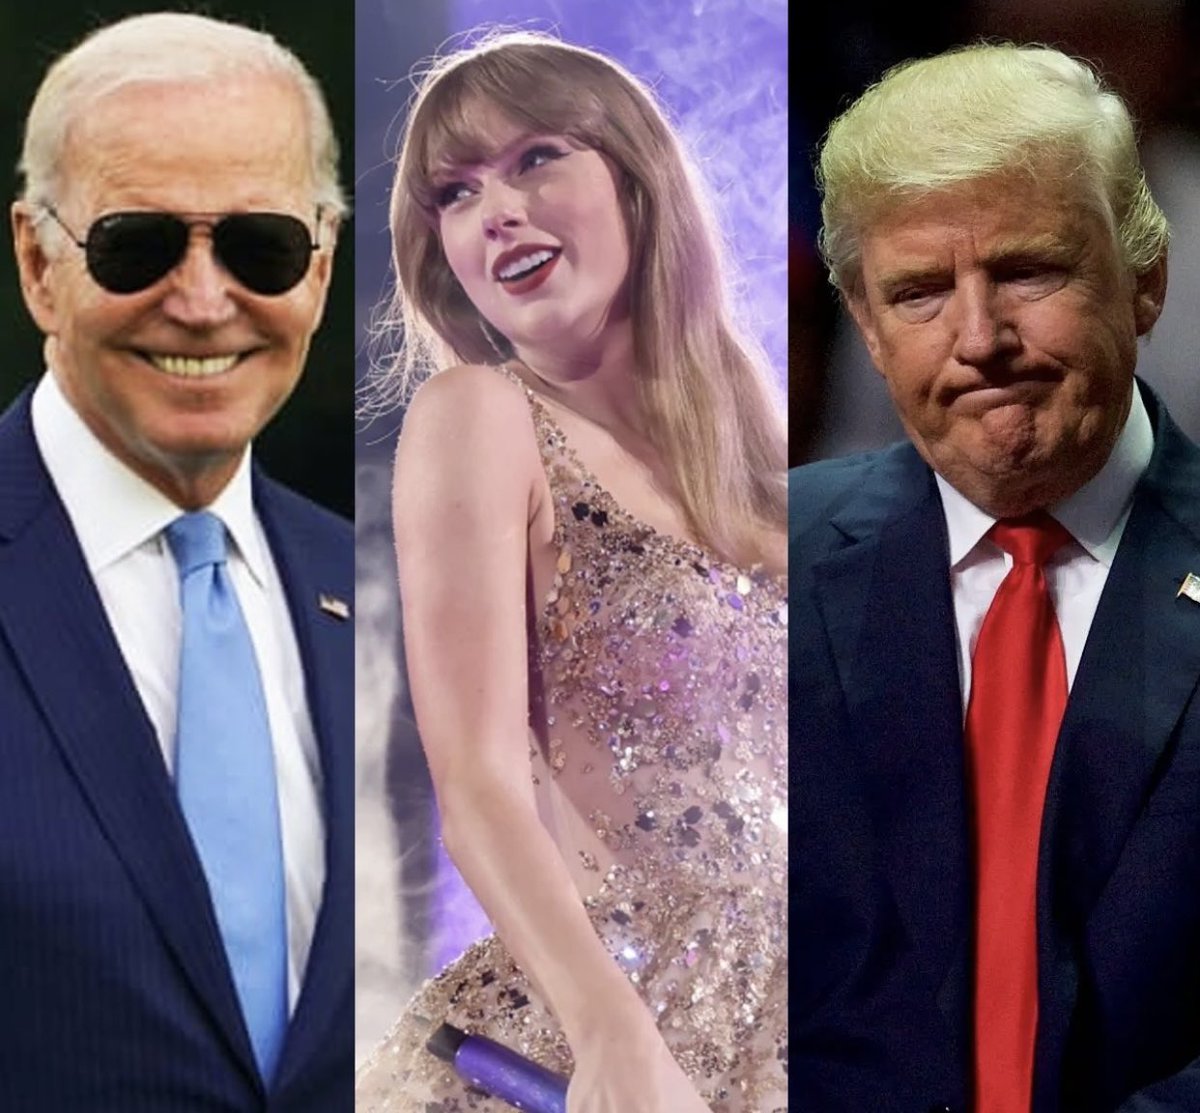 Trump has Kid Rock, Kevin Sorbo and a few irrelevant others. 

President Biden has Taylor Swift, Mark Hamill, Bruce Springsteen, Lady Gaga, Stephen King, Willy Nelson, Jon Stewart, George Clooney, Oprah and so many more.

Drop a ❤️ and Repost to thank them for supporting Joe